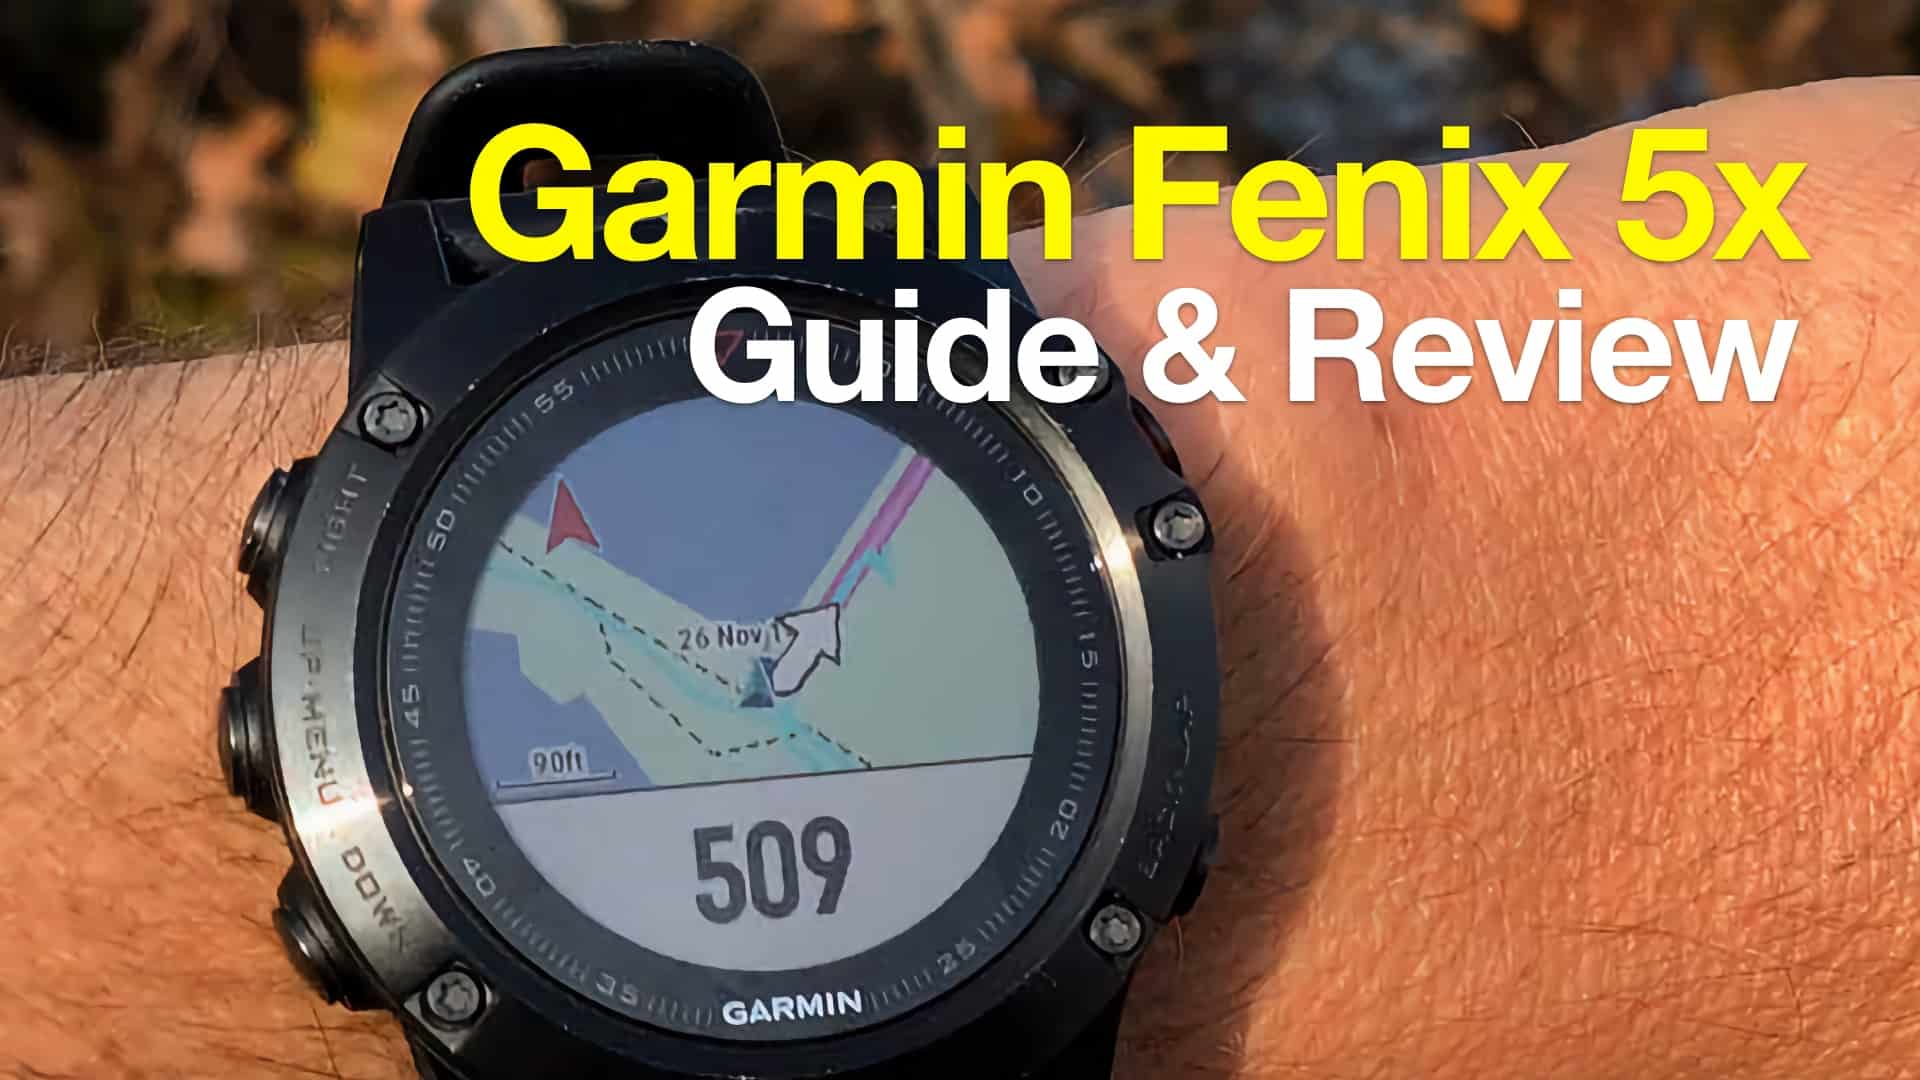 Fenix Hiking Review & Easy Use Guide - HikingGuy.com